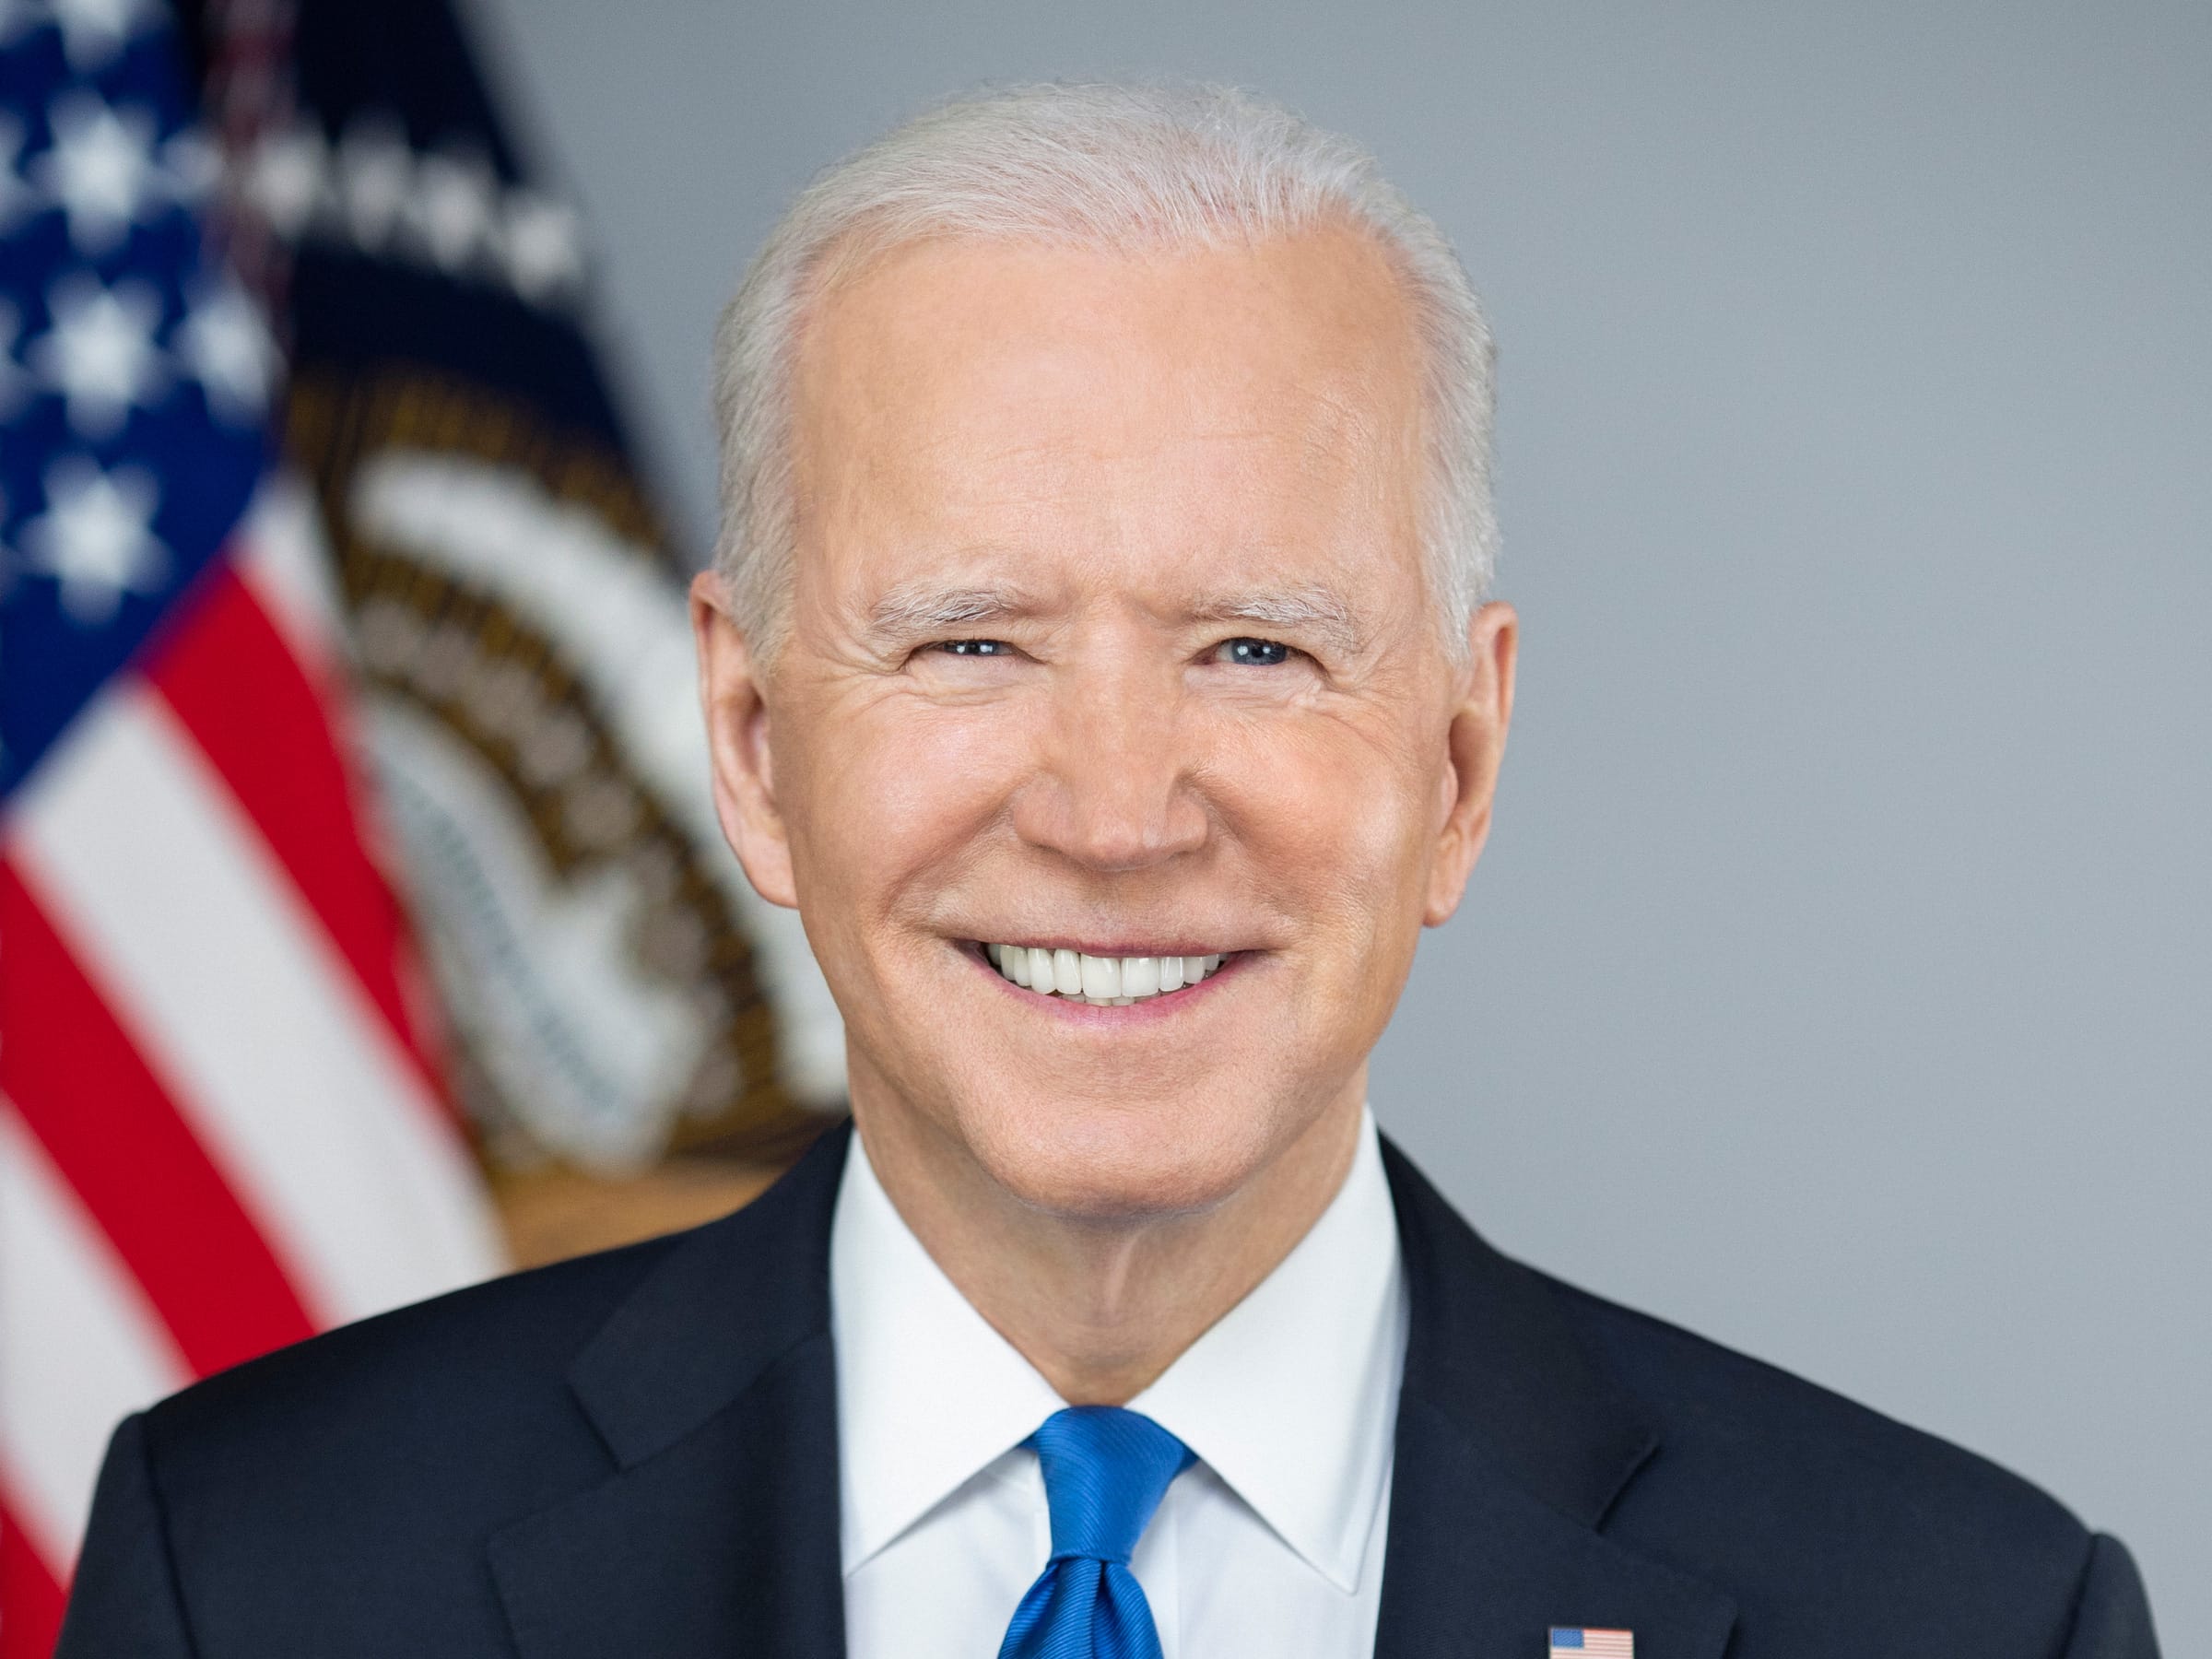 what speeches did joe biden plagerize - Biden|President|Joe|Years|Trump|Delaware|Vice|Time|Obama|Senate|States|Law|Age|Campaign|Election|Administration|Family|House|Senator|Office|School|Wife|People|Hunter|University|Act|State|Year|Life|Party|Committee|Children|Beau|Daughter|War|Jill|Day|Facts|Americans|Presidency|Joe Biden|United States|Vice President|White House|Law School|President Trump|Foreign Relations Committee|Donald Trump|President Biden|Presidential Campaign|Presidential Election|Democratic Party|Syracuse University|United Nations|Net Worth|Barack Obama|Judiciary Committee|Neilia Hunter|U.S. Senate|Hillary Clinton|New York Times|Obama Administration|Empty Store Shelves|Systemic Racism|Castle County Council|Archmere Academy|U.S. Senator|Vice Presidency|Second Term|Biden Administration